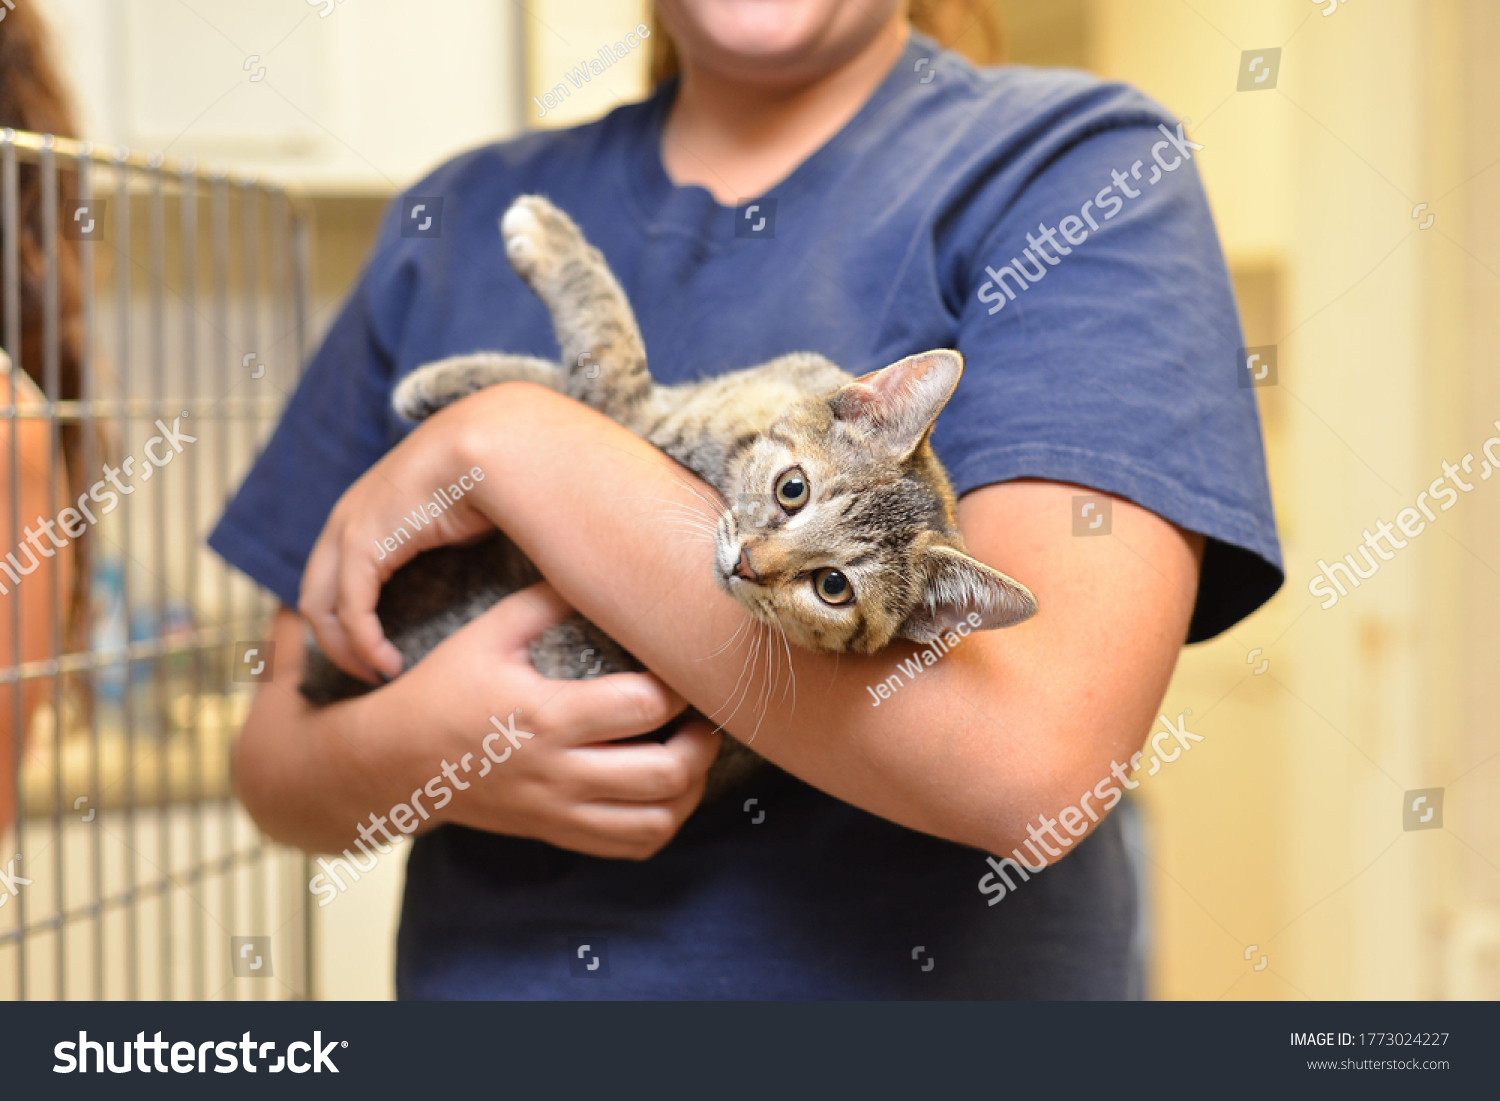 Cat at an Animal Shelter #1773024227